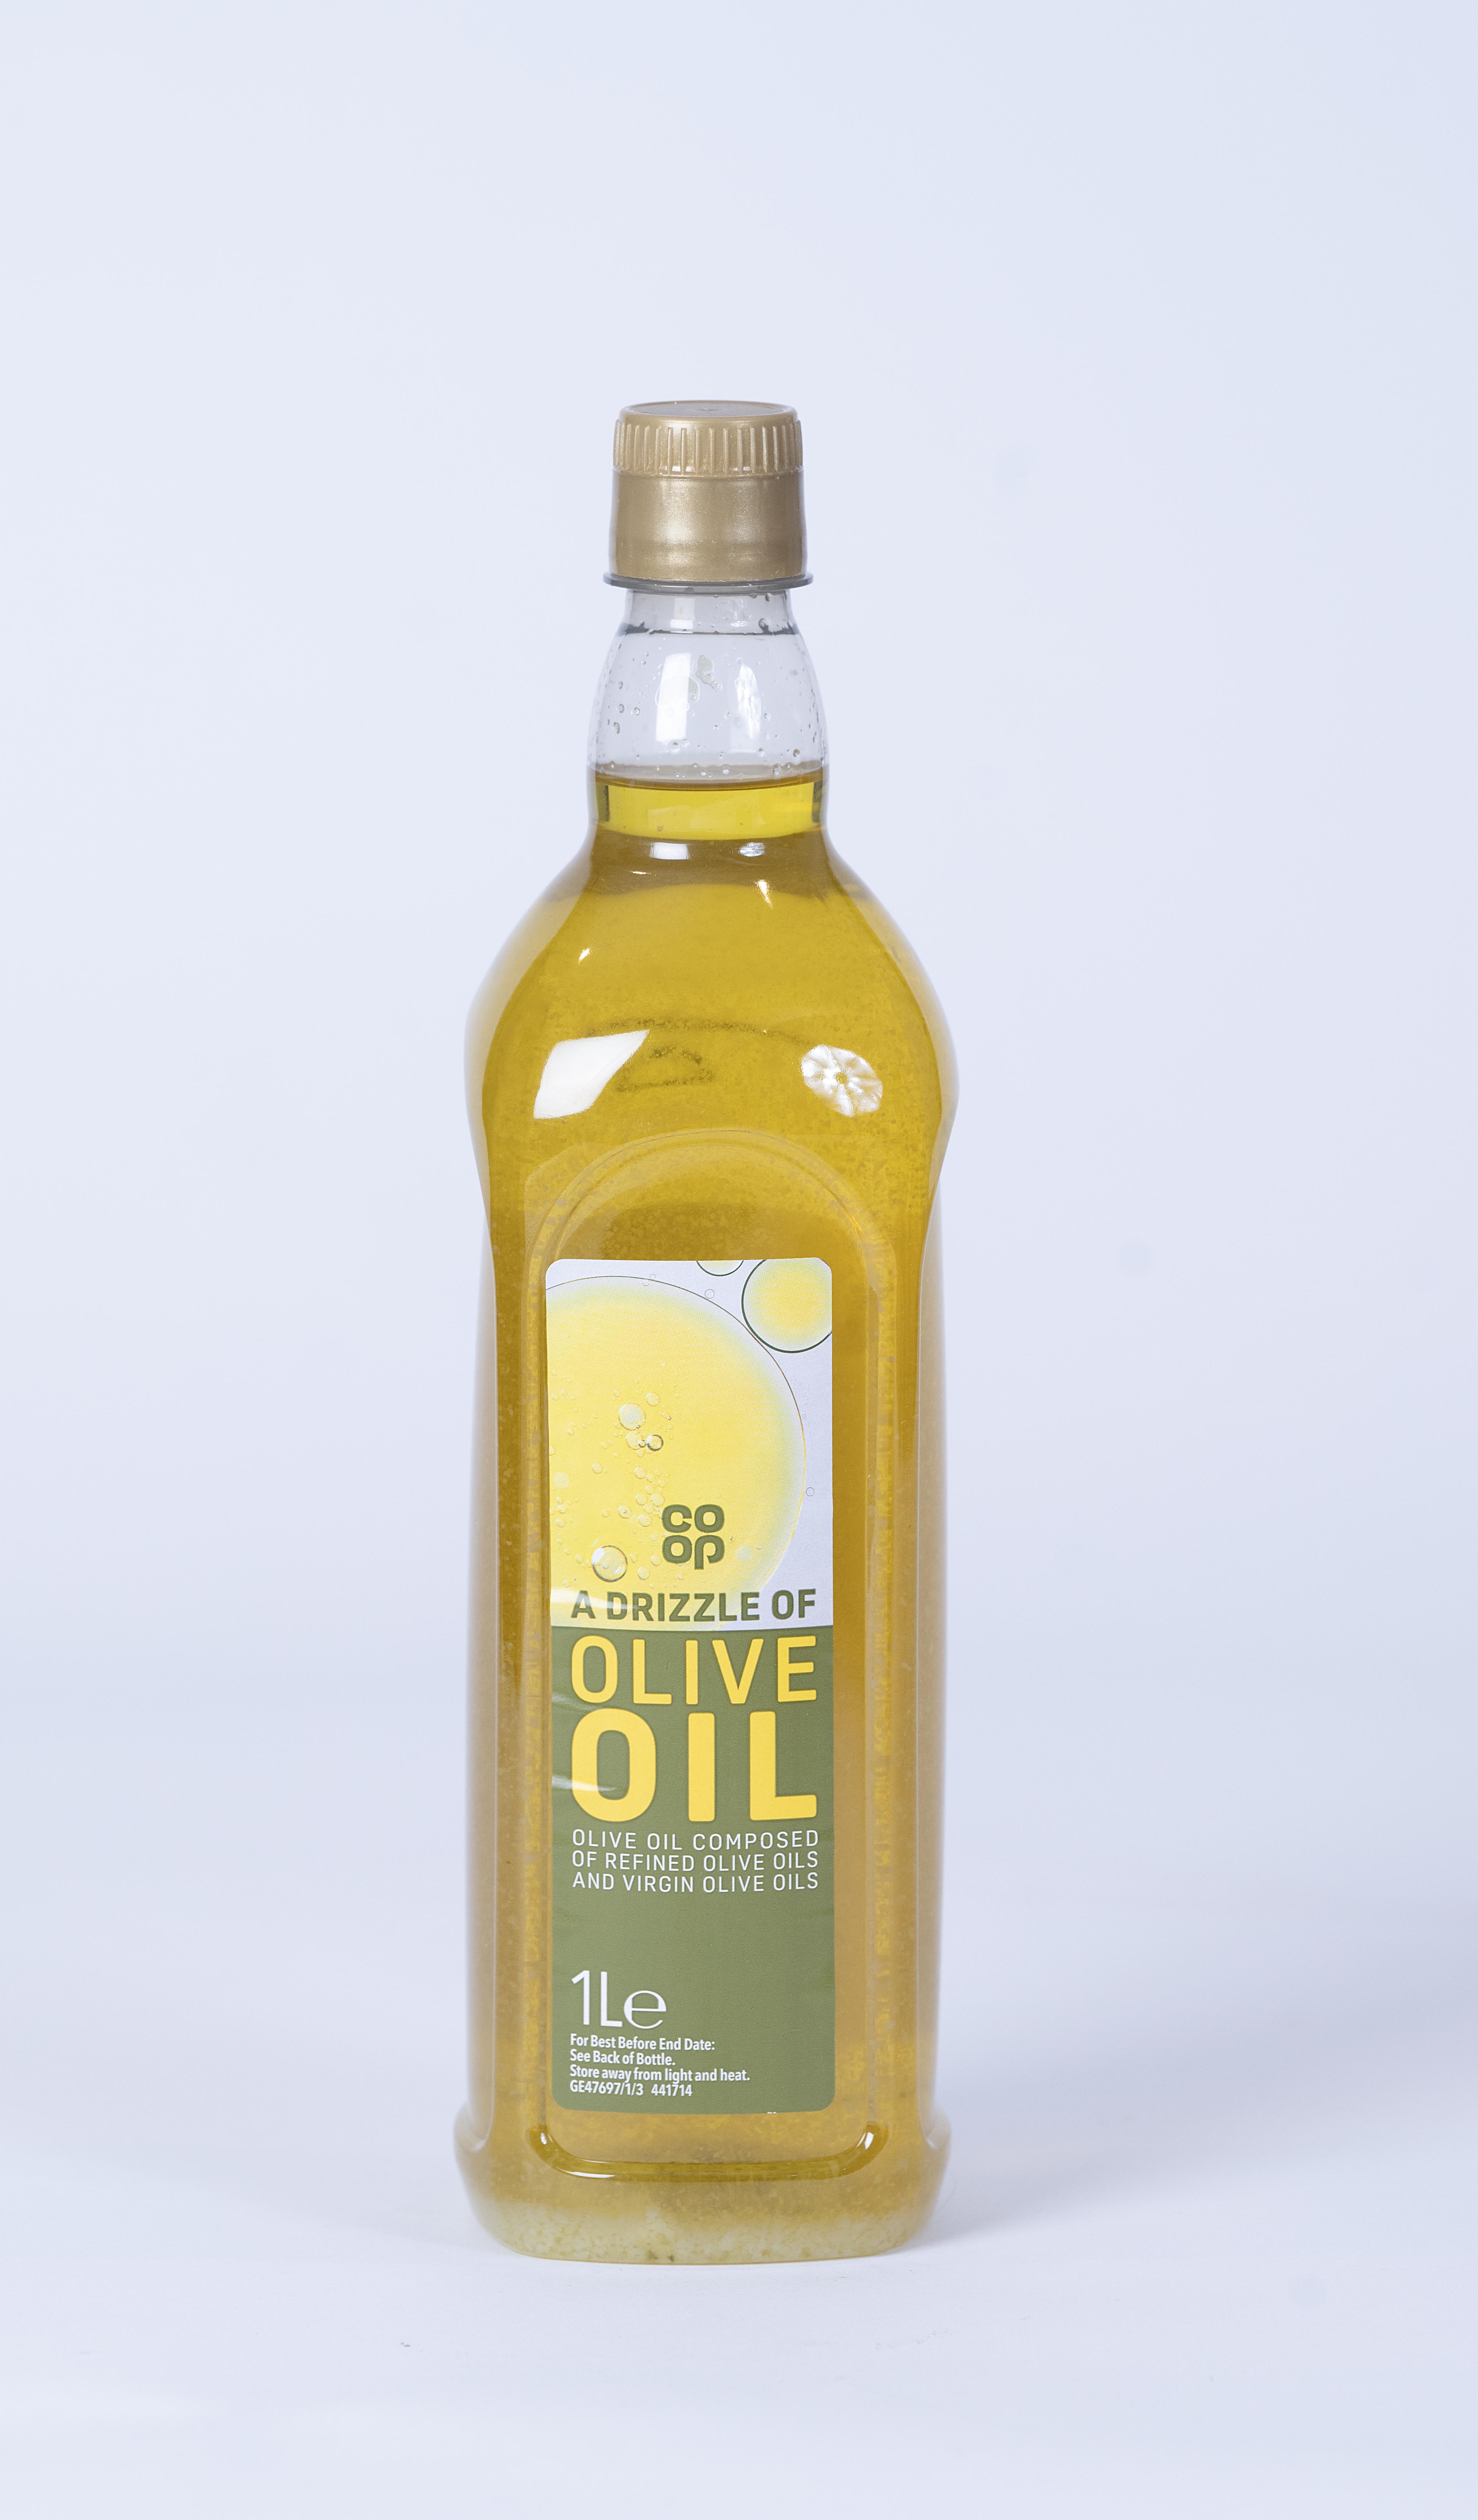 Co-op's olive oil was marred by disgusting floating sediment